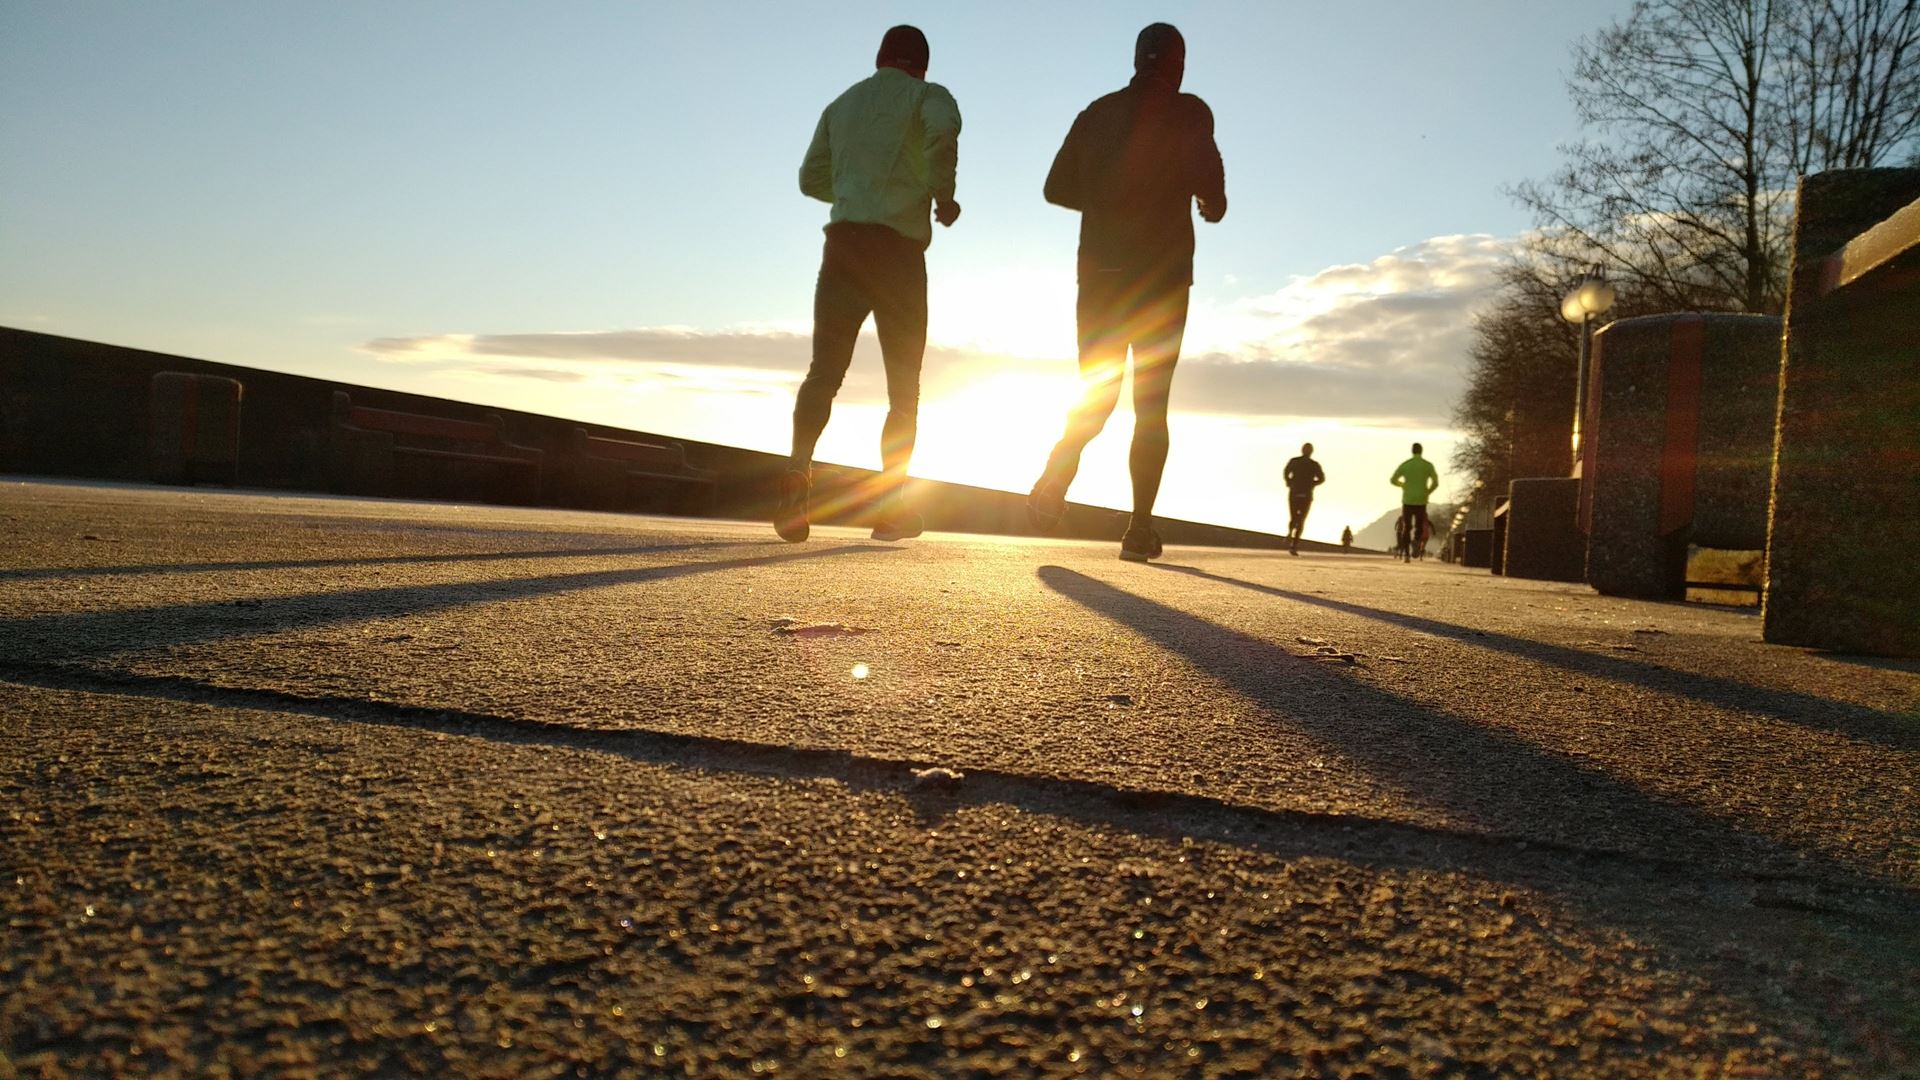 People running on a concrete path, silhouetted against the setting sun